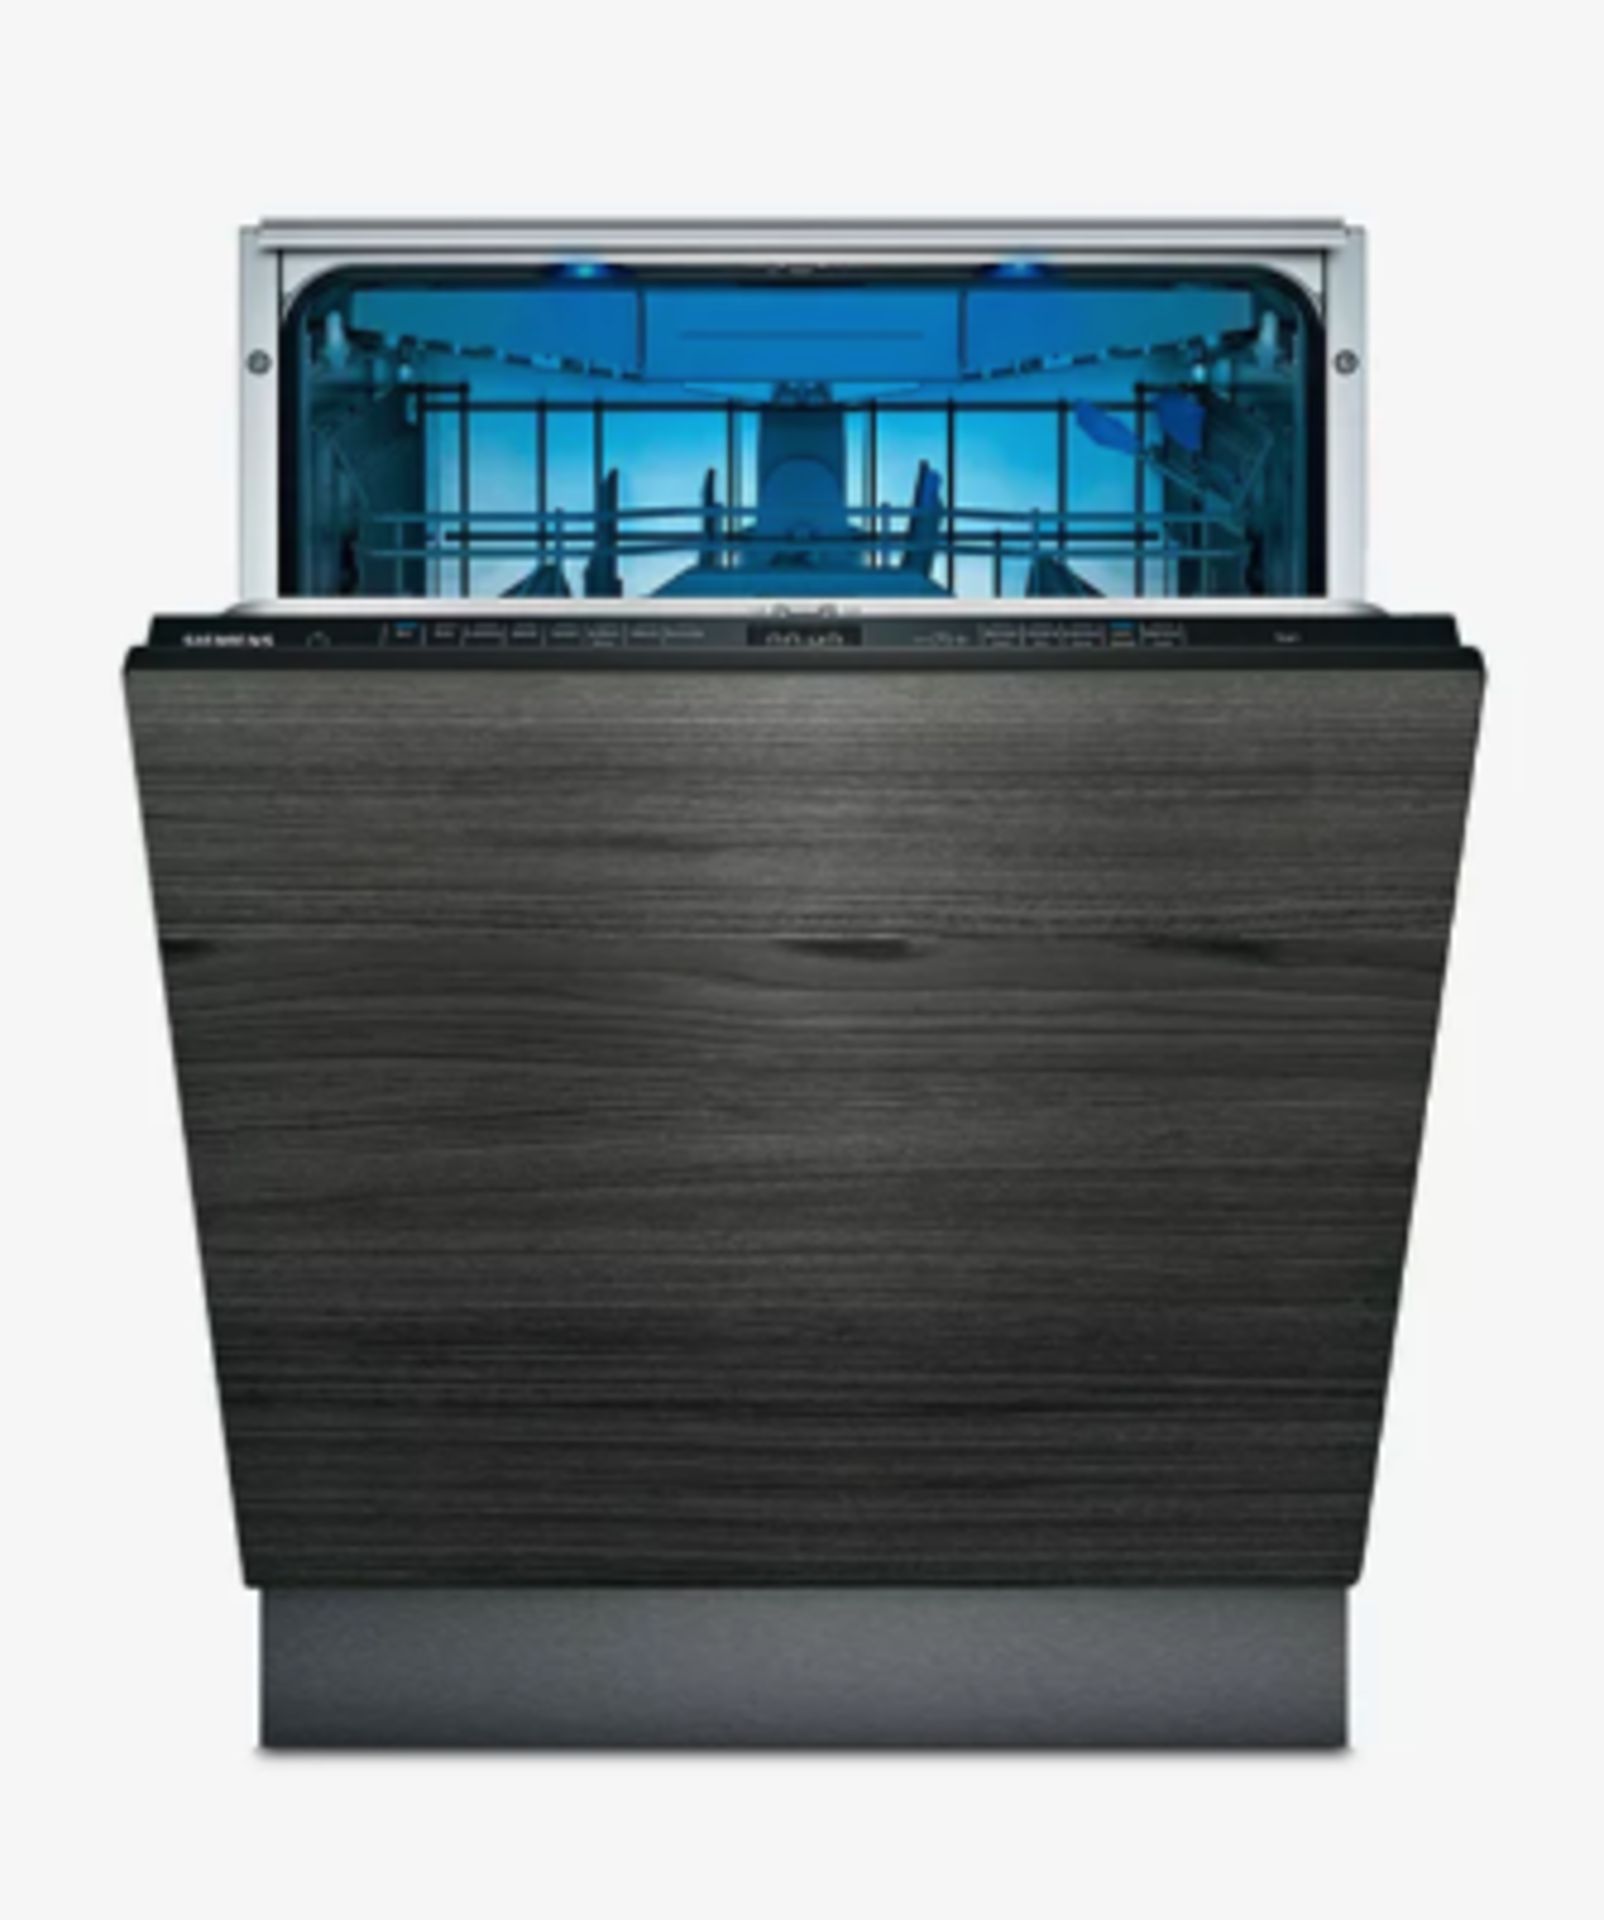 Item Description - Siemens iQ500 SN95ZX61CG Fully Integrated Dishwasher - Stock Number - 8...